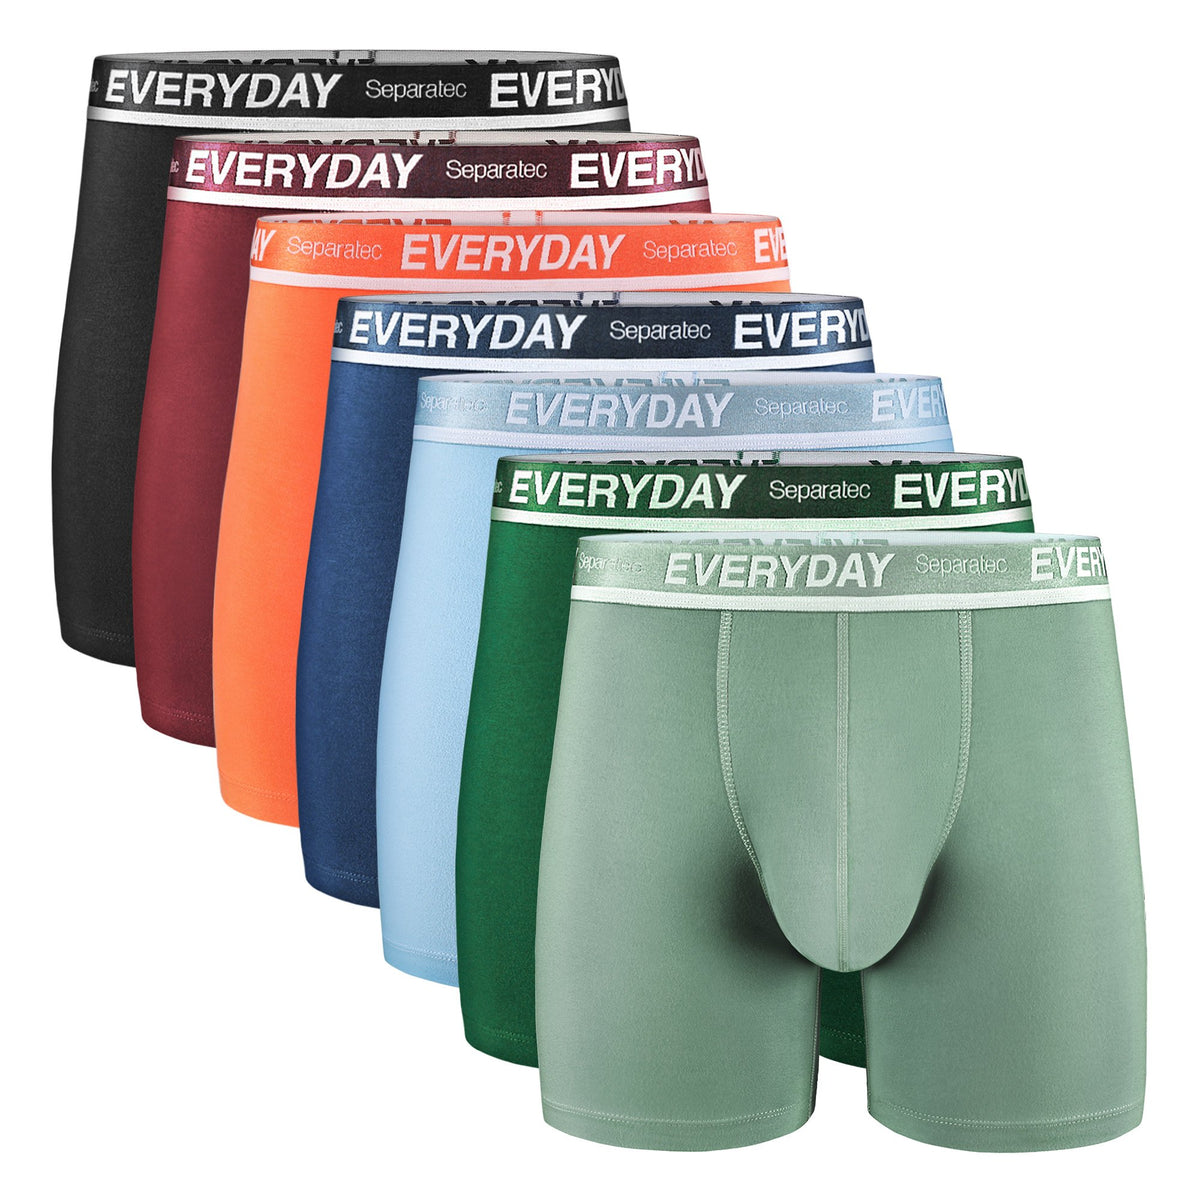 Undewear Review: Separatec - Colorful Cotton Boxer Briefs with